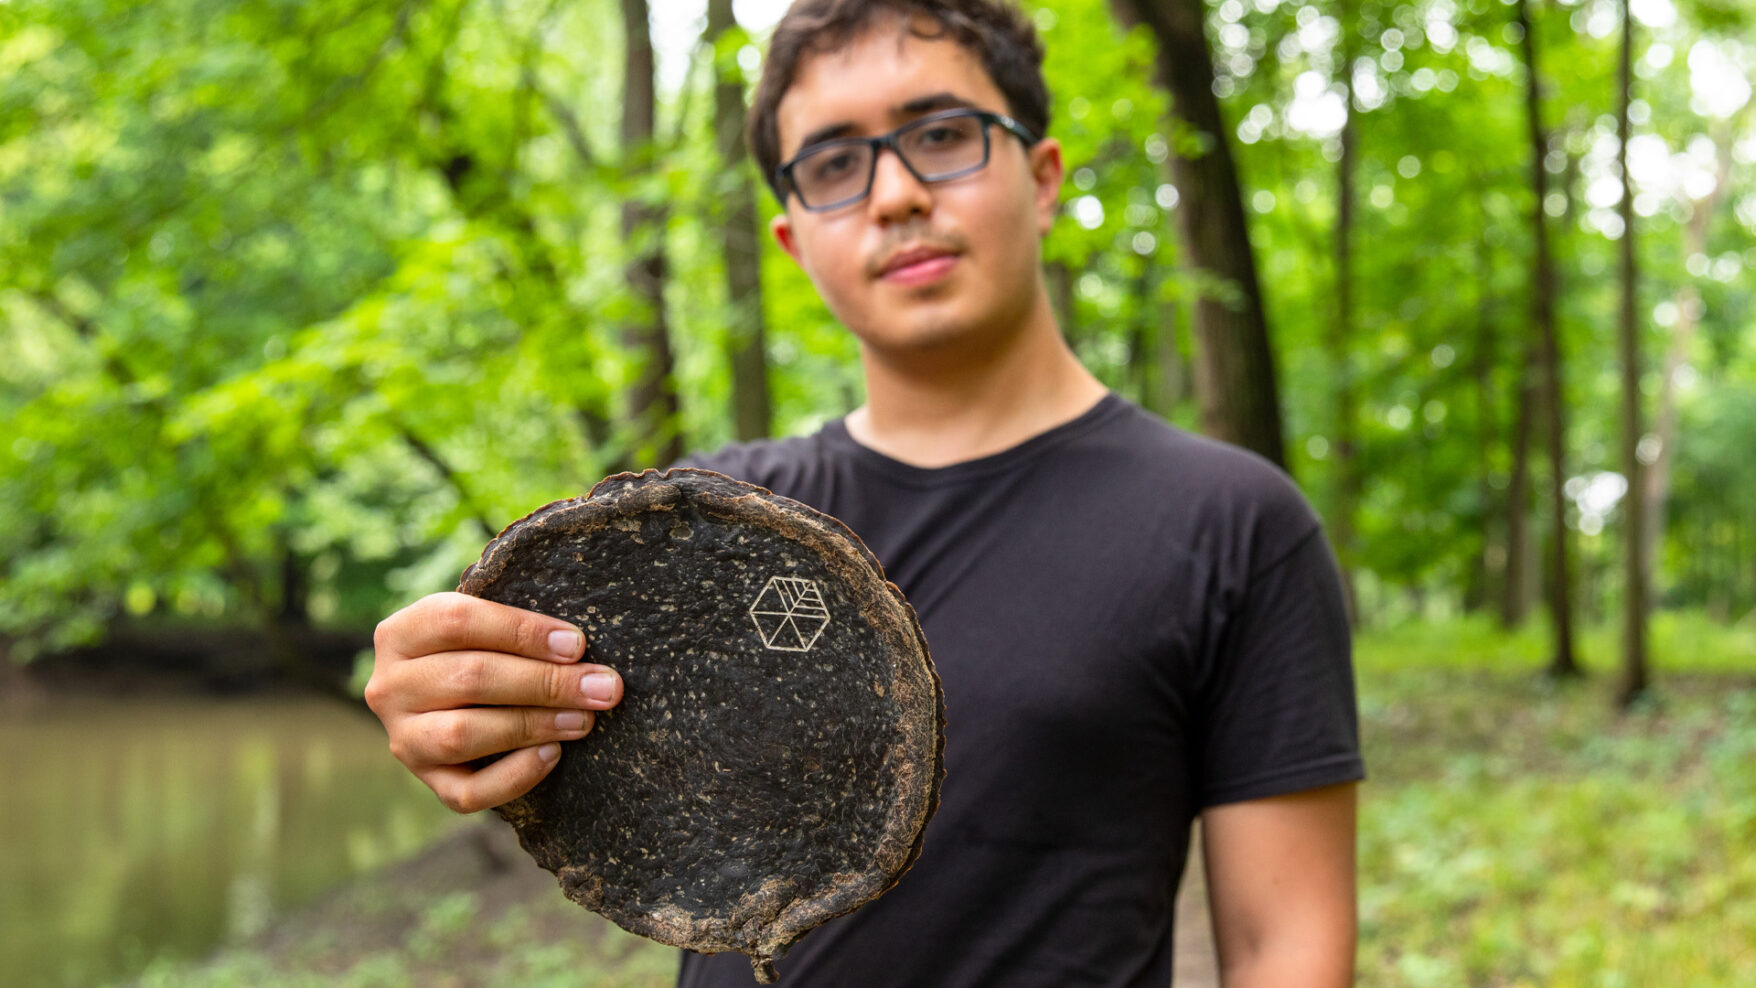 Gabe Tavas standing in a forest preserve surrounded by trees holding a rounded piece of Pyrus, the wood alternative.